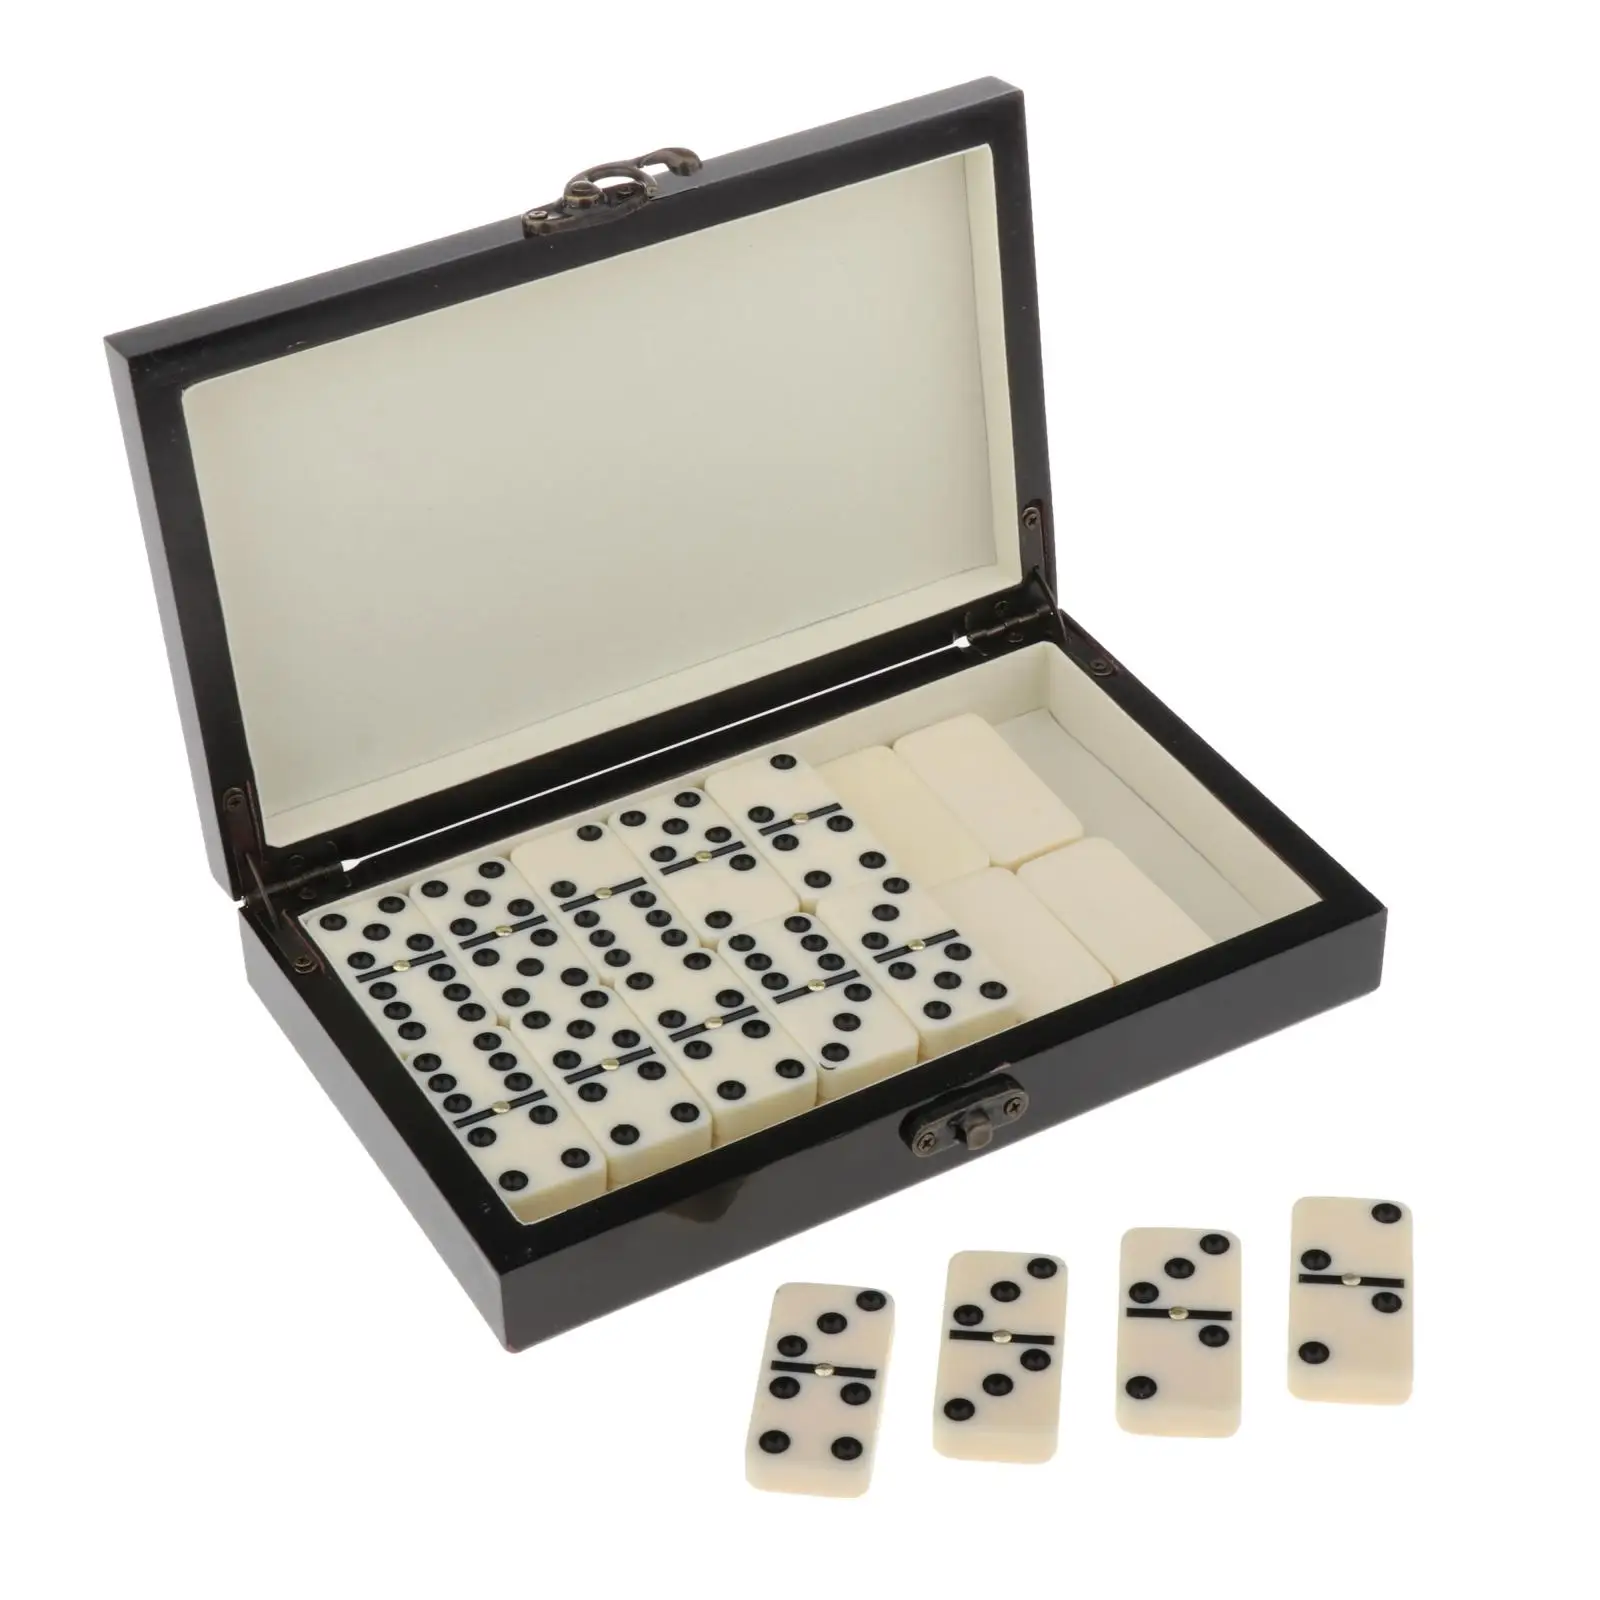 Retro Dominoes Traditional Board Travel Game Toys for Both Adults and Children, Comes with Wooden Box, Easy Storage and Carry